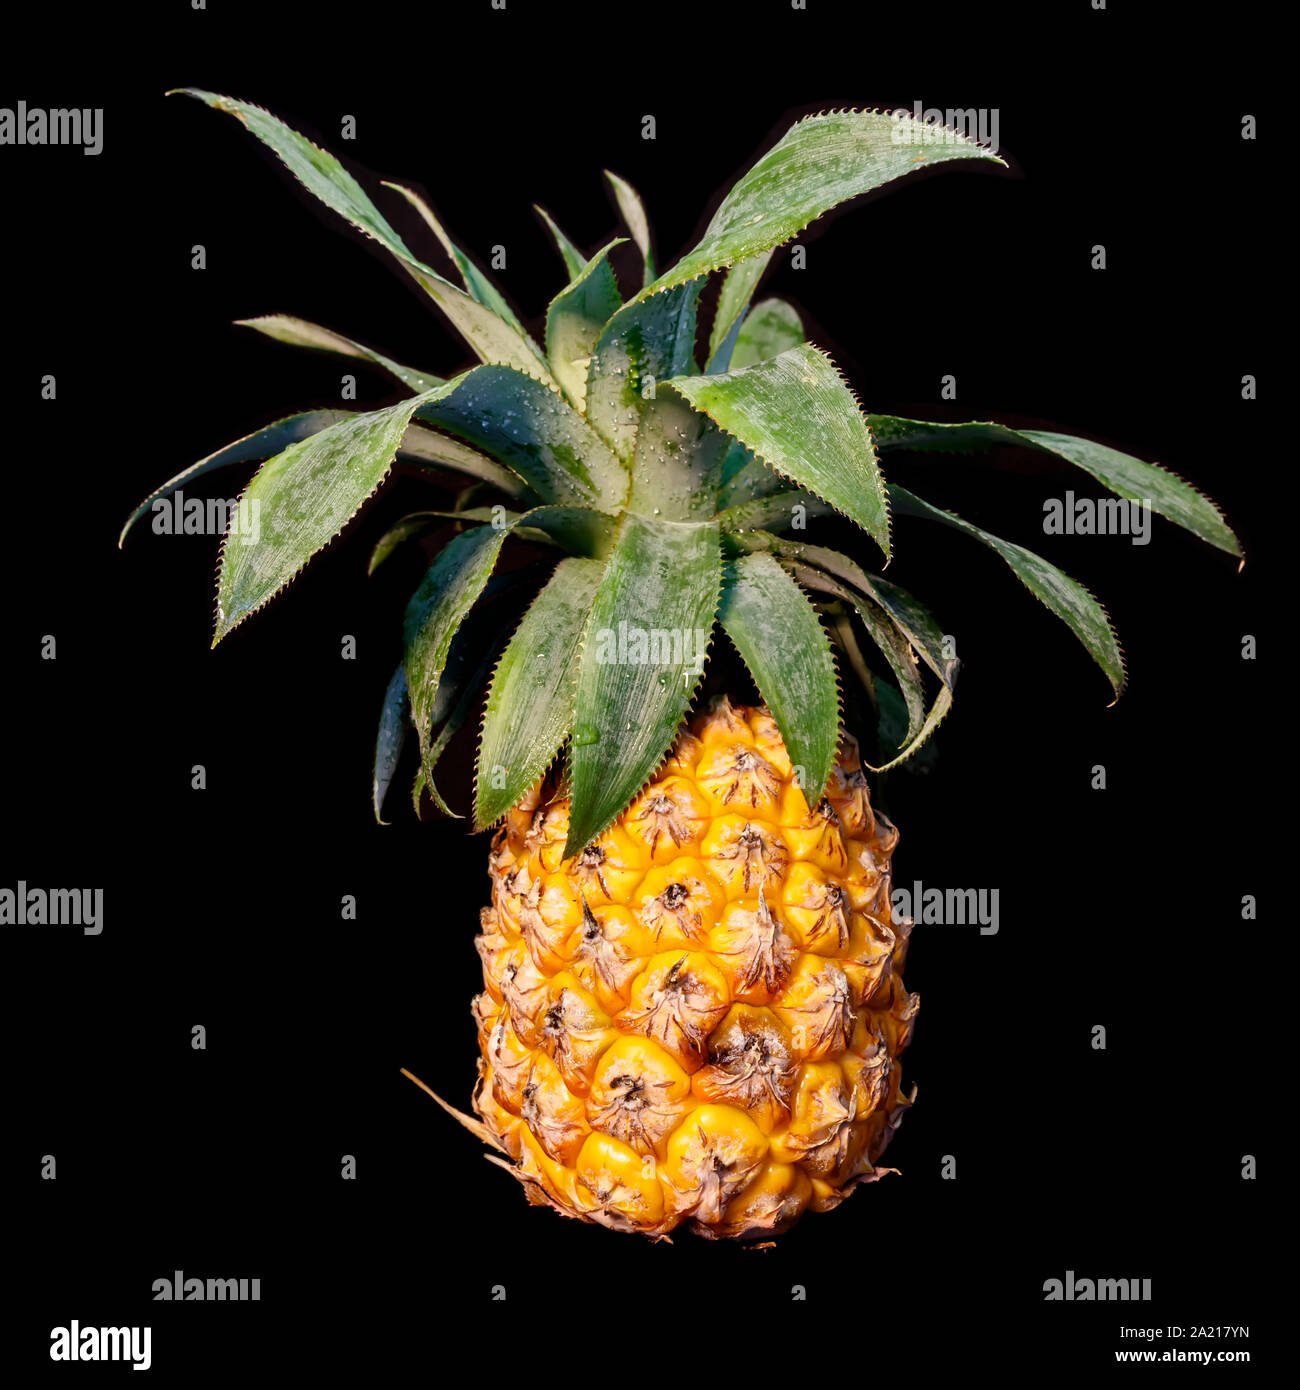 Ripe pineapple fruit with dew drops on leaves closeup isolated on black background Stock Photo